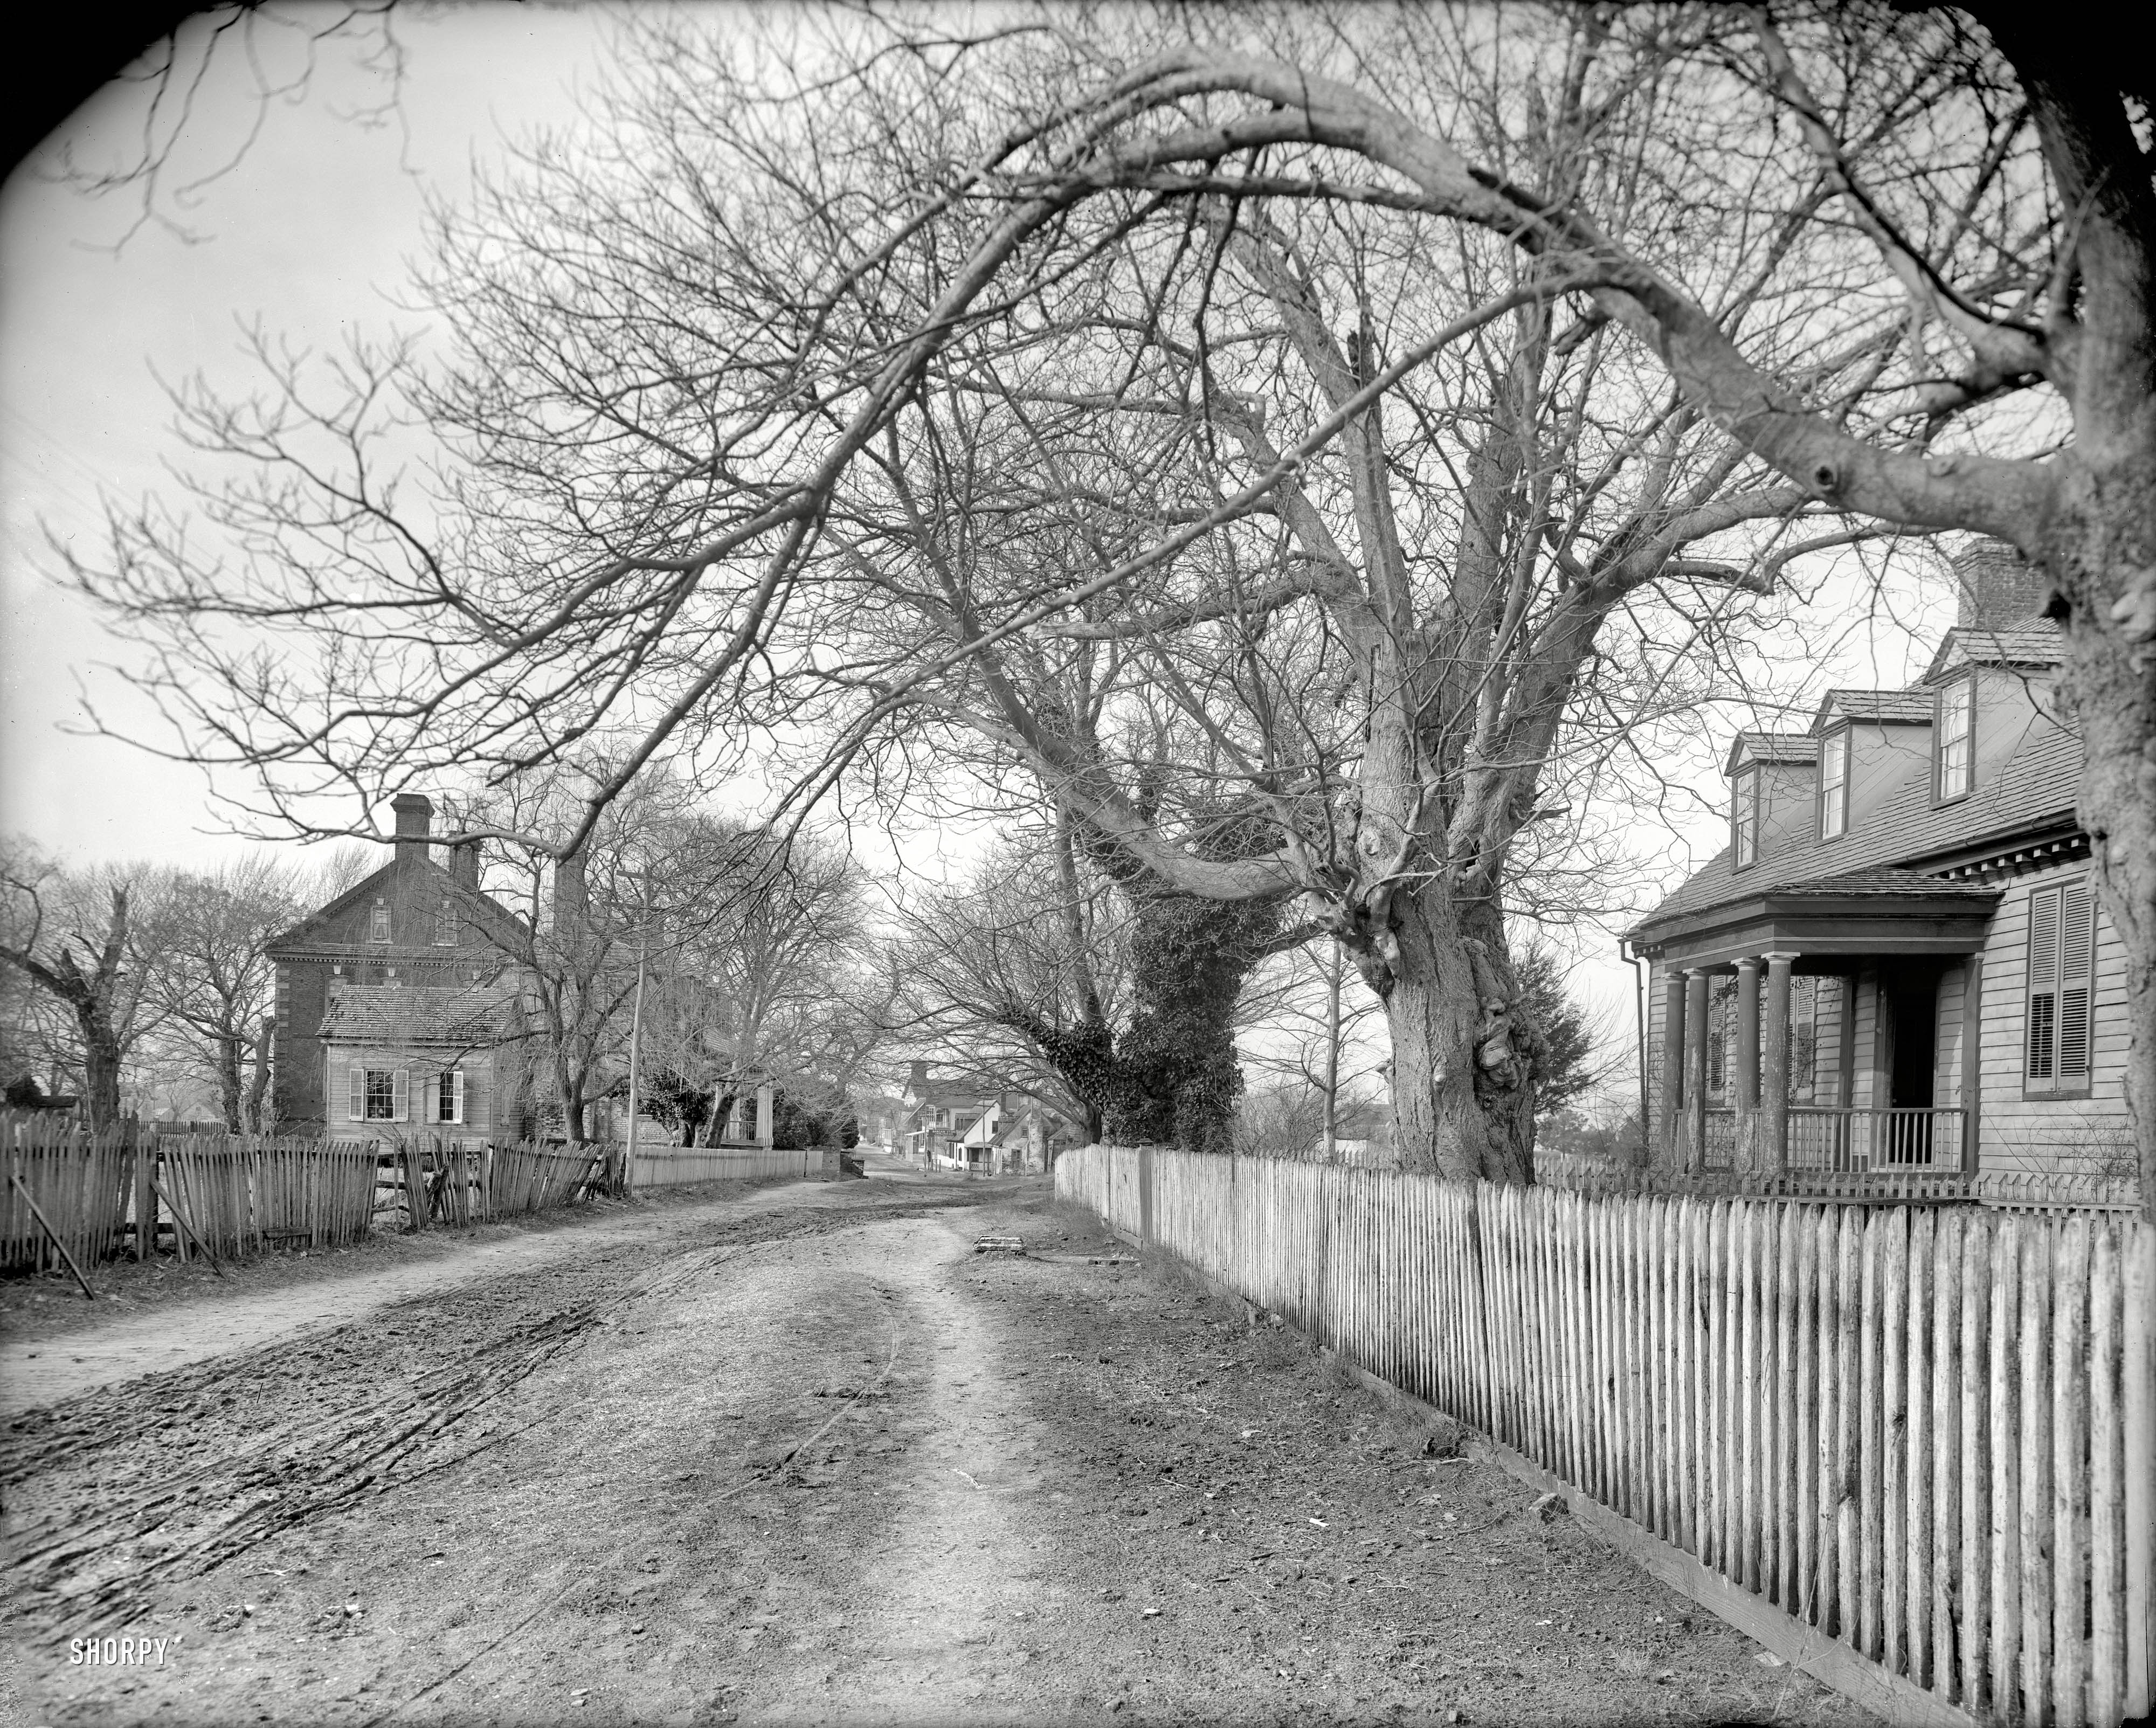 Circa 1903. "A street in Yorktown, Virginia." 8x10 glass negative by none other than William Henry Jackson. Detroit Photographic Company. View full size.